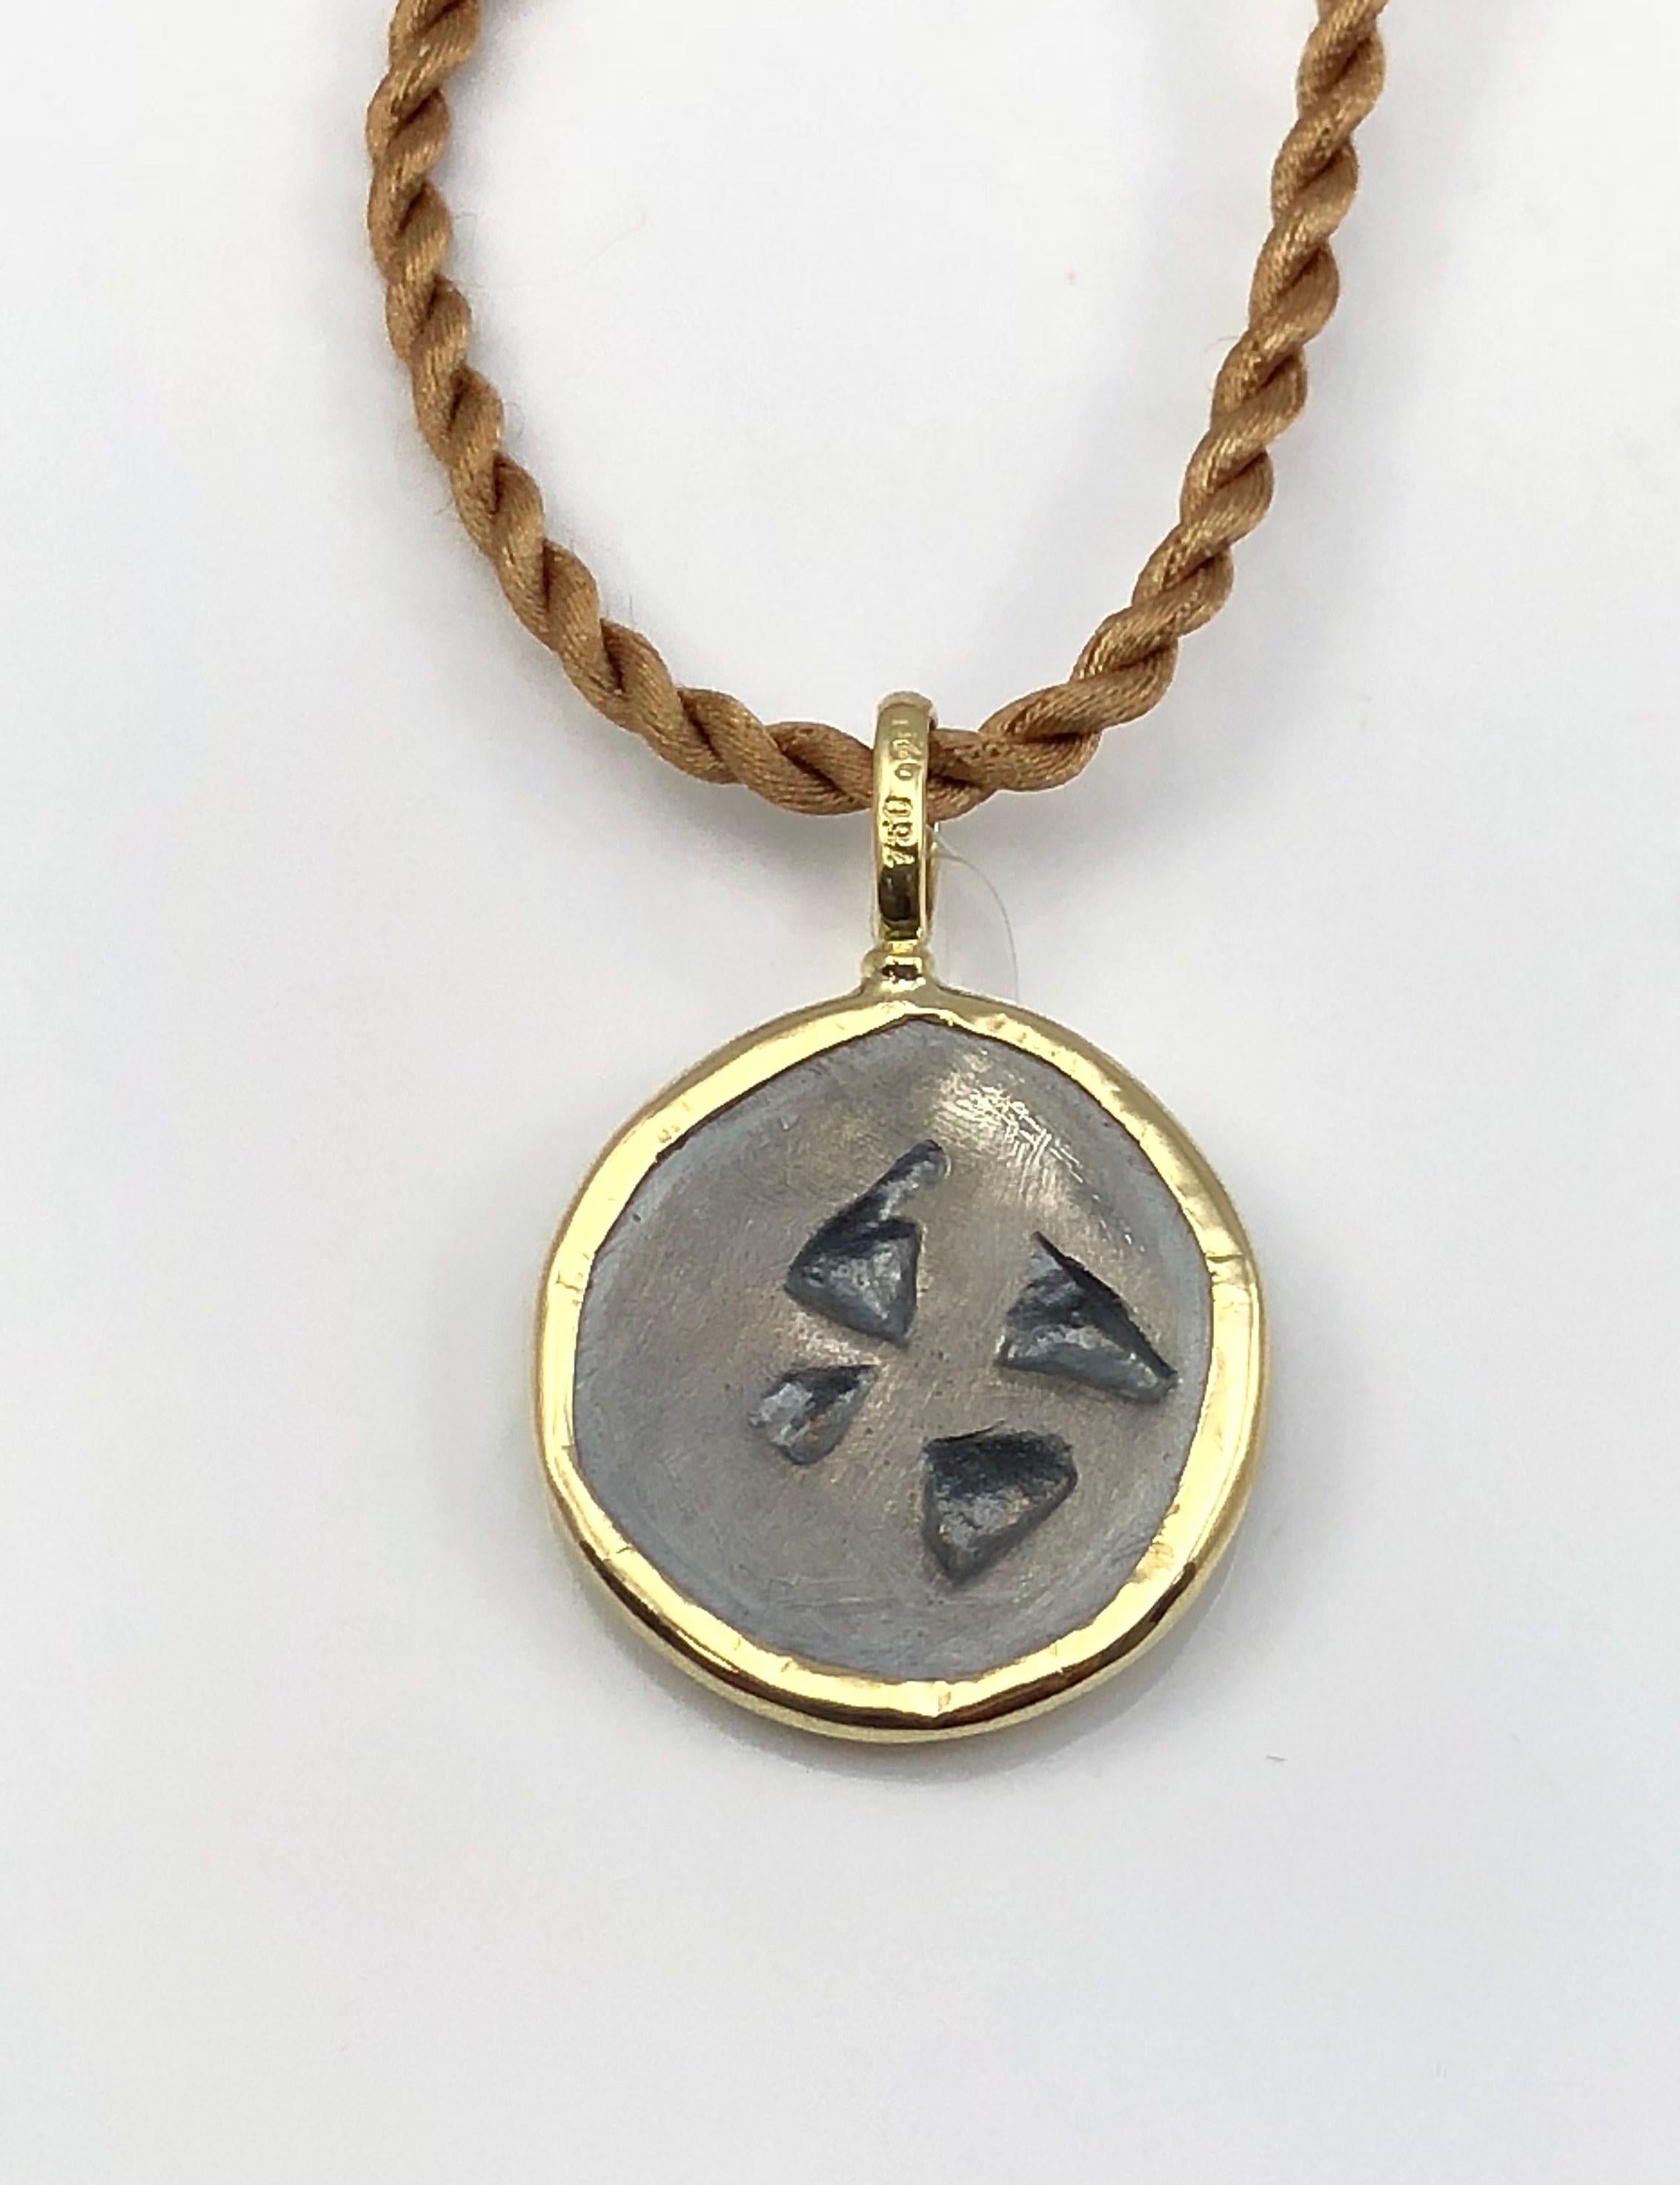 S.Georgios designer 18 Karat Yellow Gold handmade Pendant Necklace featuring a replica of an Ancient Greek Coin in Silver 925 with Amphora and Dolphin. The coin has a beautiful reverse side and can be worn both ways and comes with an elegant silk